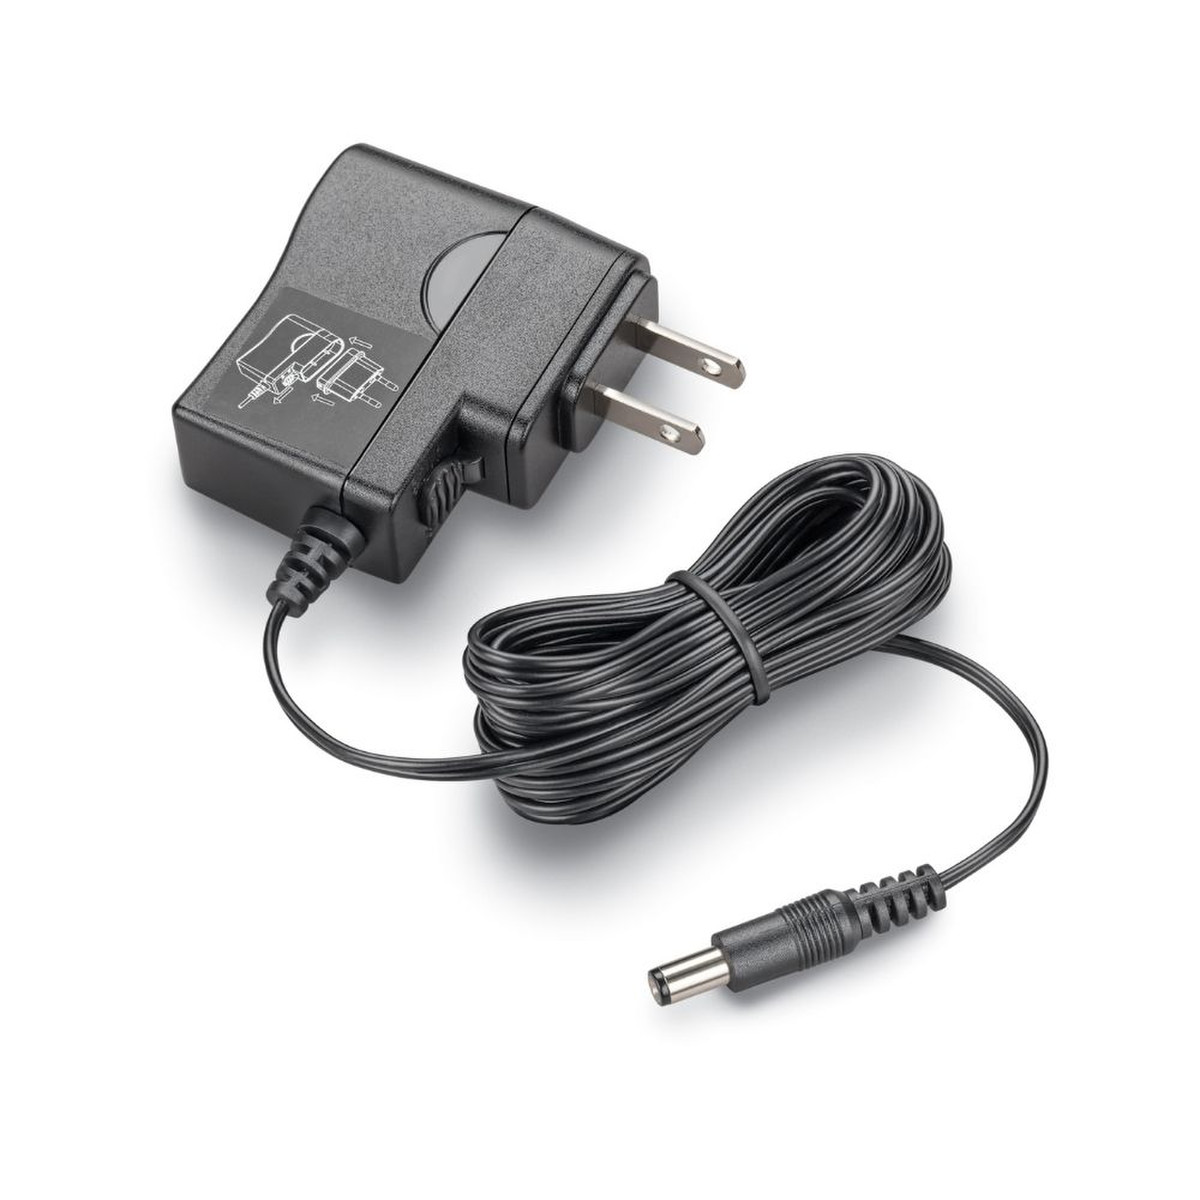 plantronics s10, s11, t20, t10 ac/dc wall adapter view